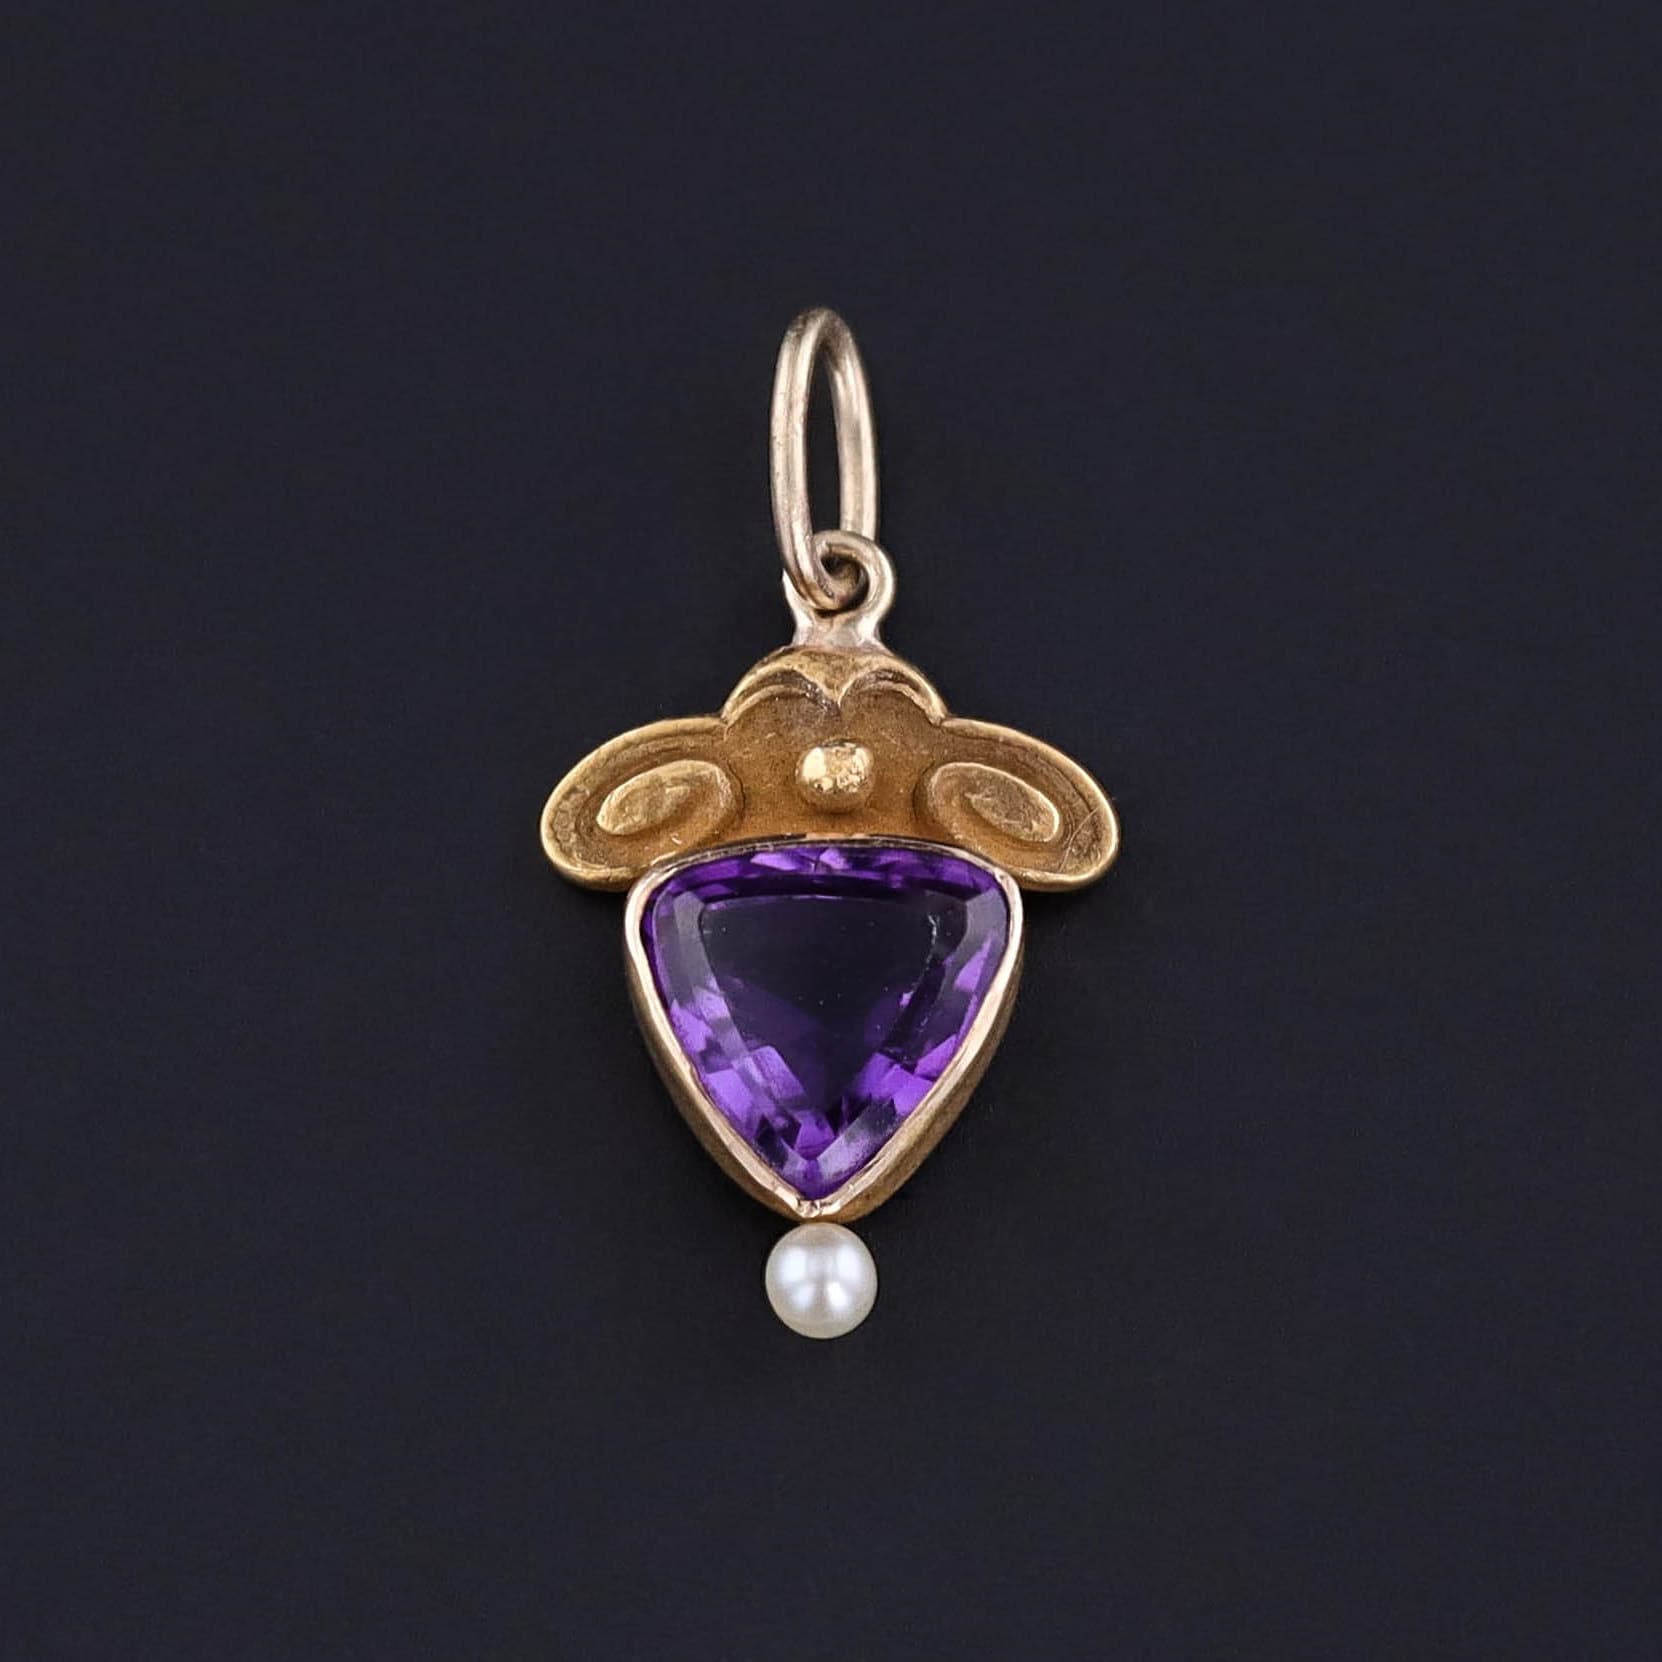 Antique Amethyst Charm of 10k Gold